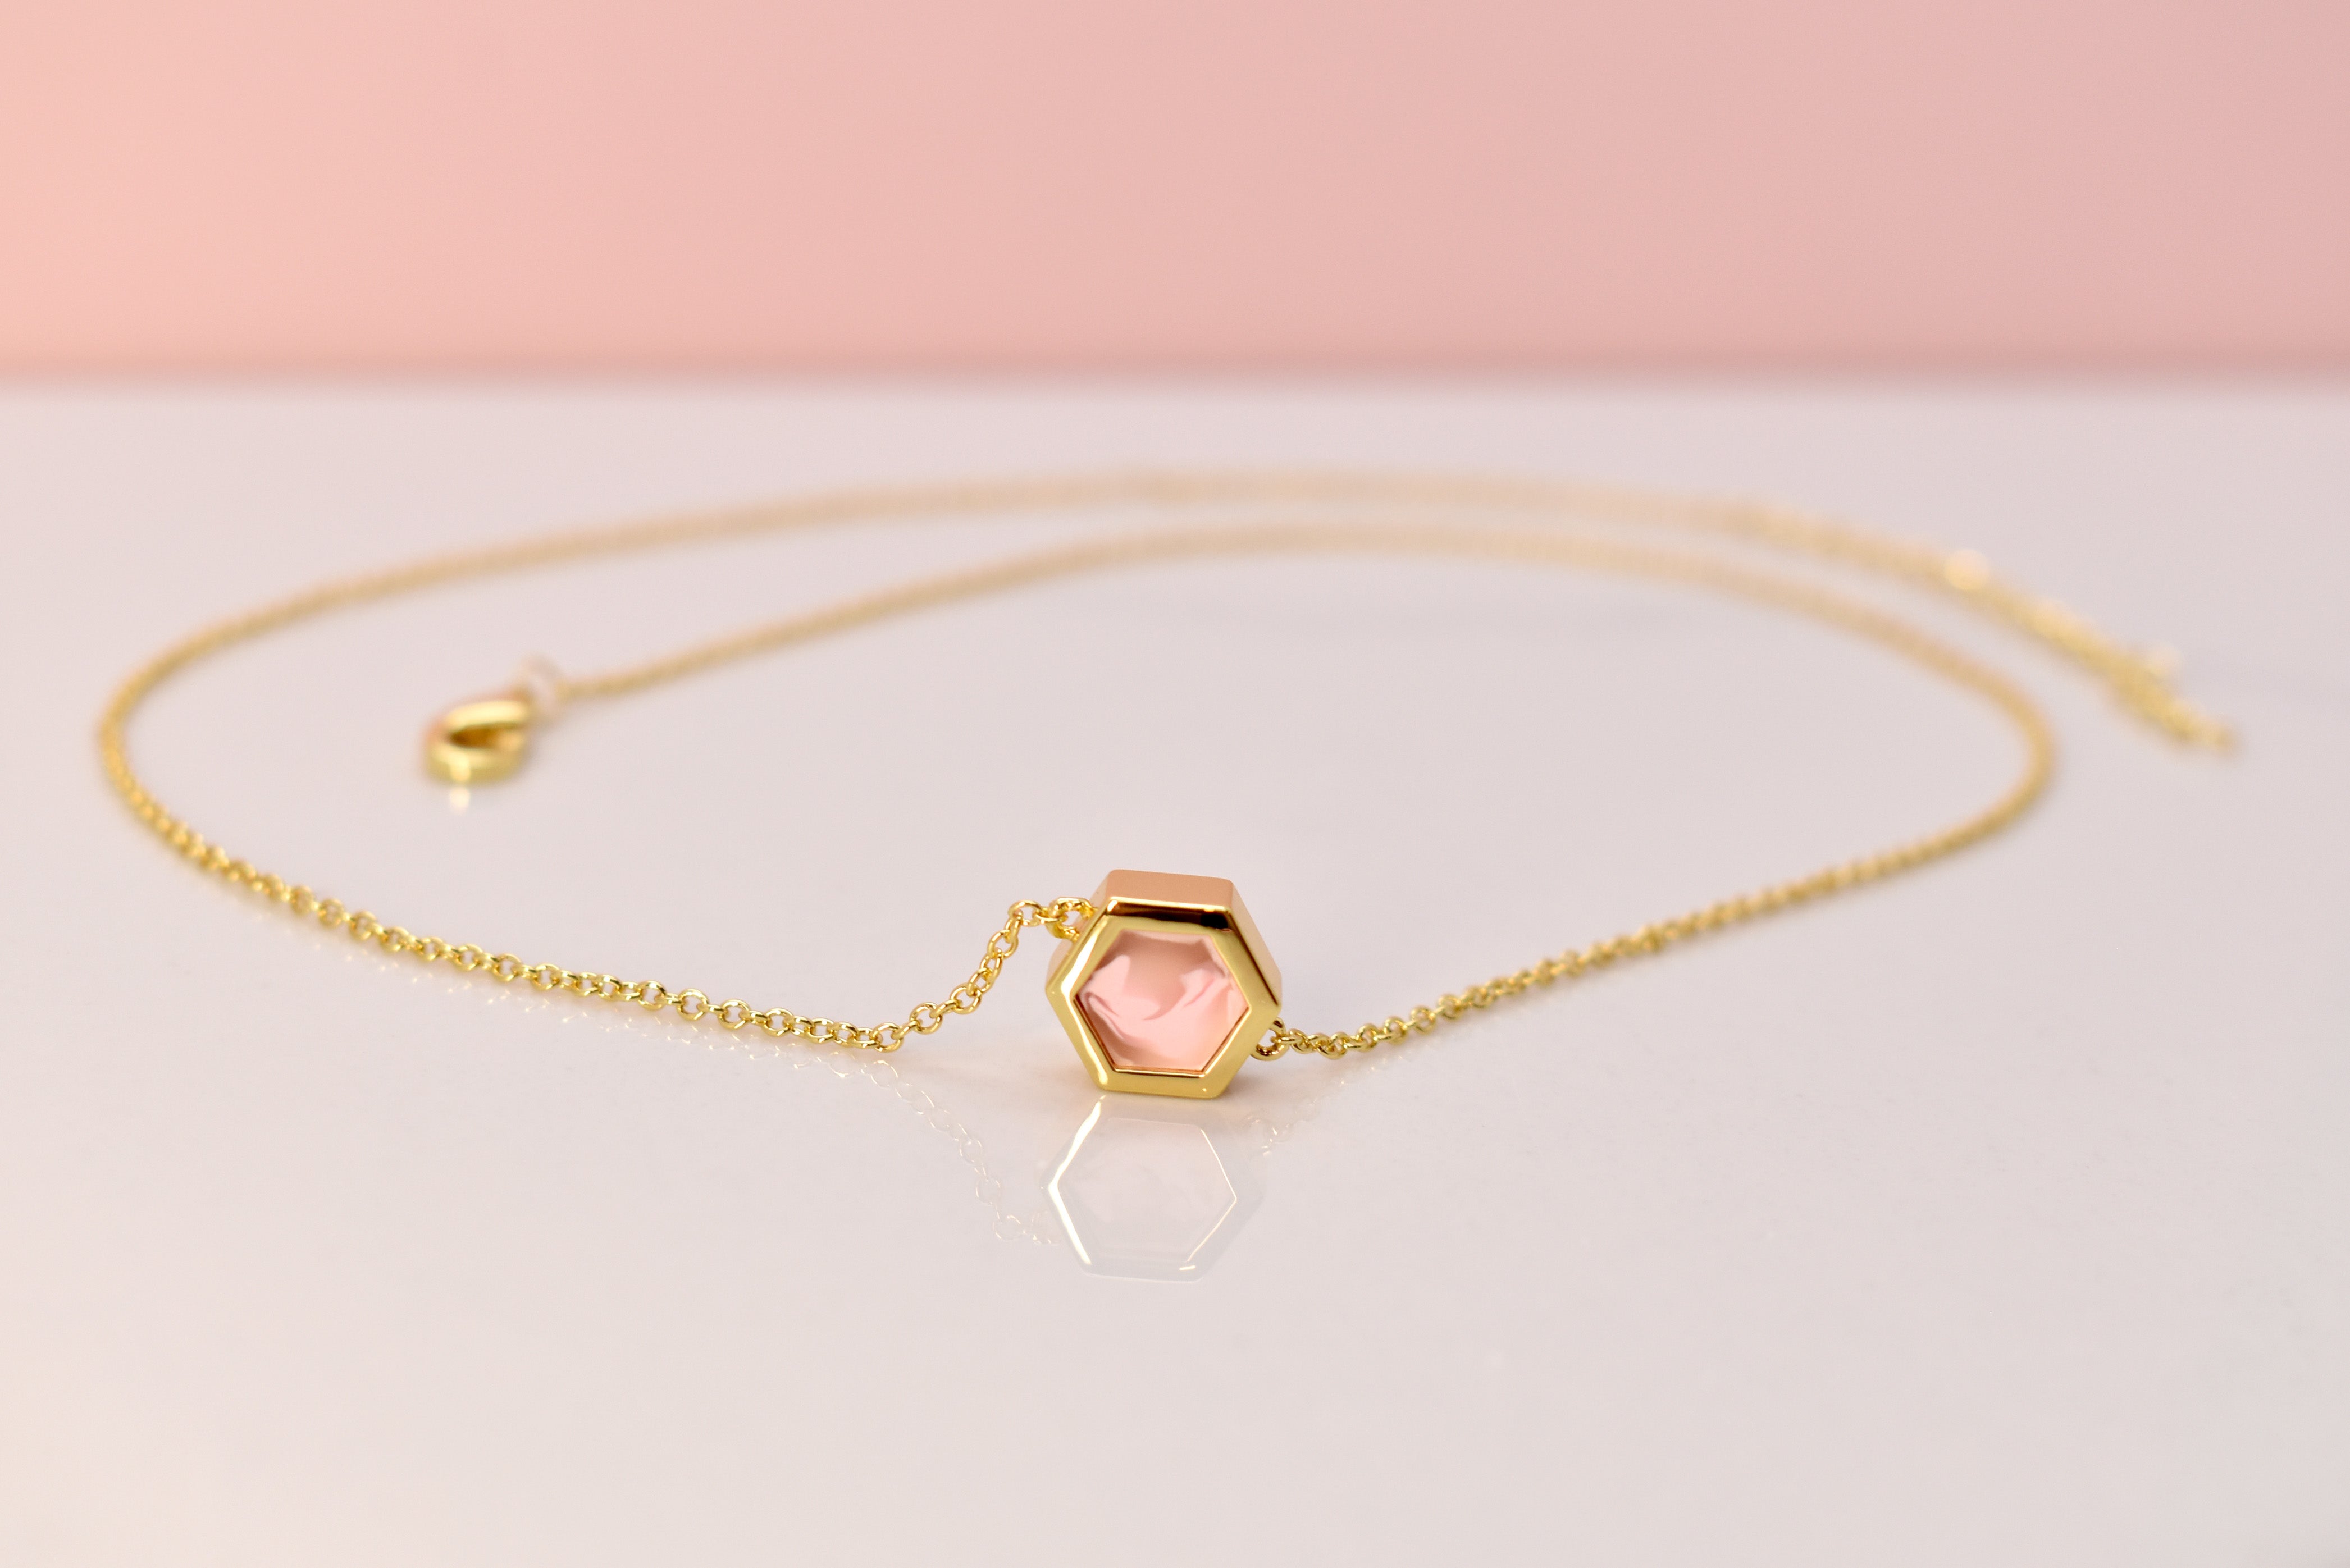 rose quartz jewelry hexagon necklace gift for her bridesmaid gifts jewelry